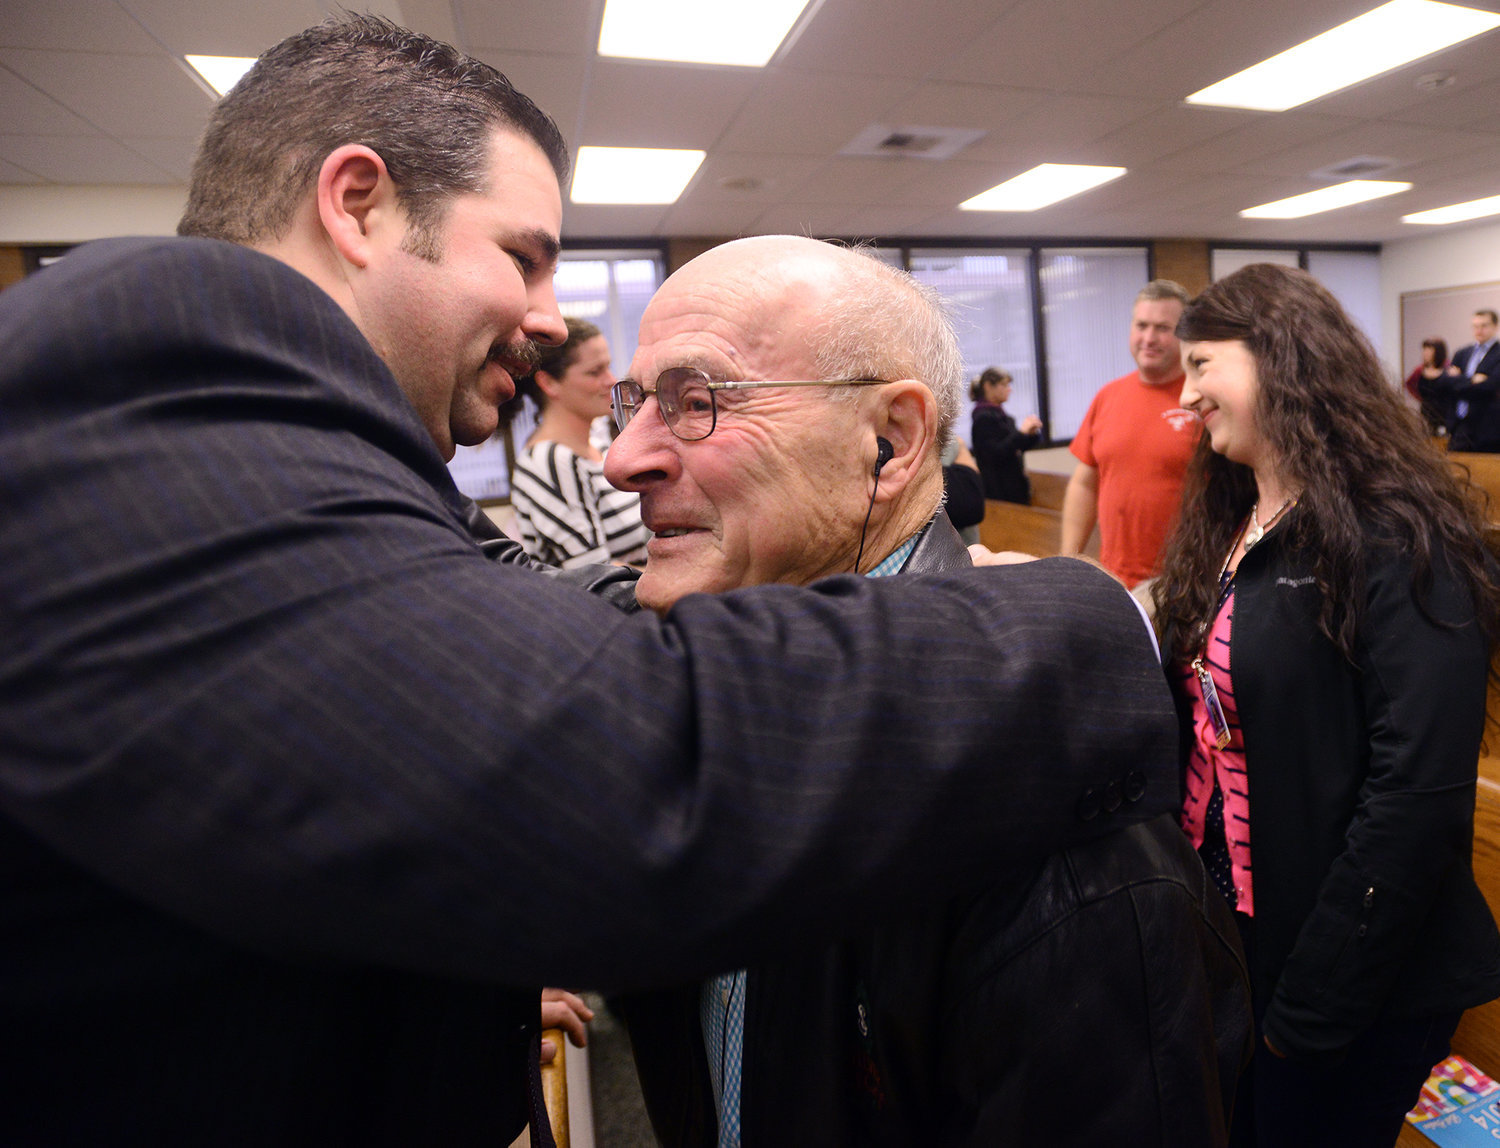 Former Lewis County Sheriff's Detective Bruce Kimsey, left, hugs Dennis Hadaller after a jury found Rick Riffe guilty of double homicide in Lewis County Superior Court in 2013 at the Lewis County Law and Justice Center in Chehalis. Hadaller was the son of Minnie Maurin, who, along with her husband, Ed, were murdered by Riffe in December of 1985.